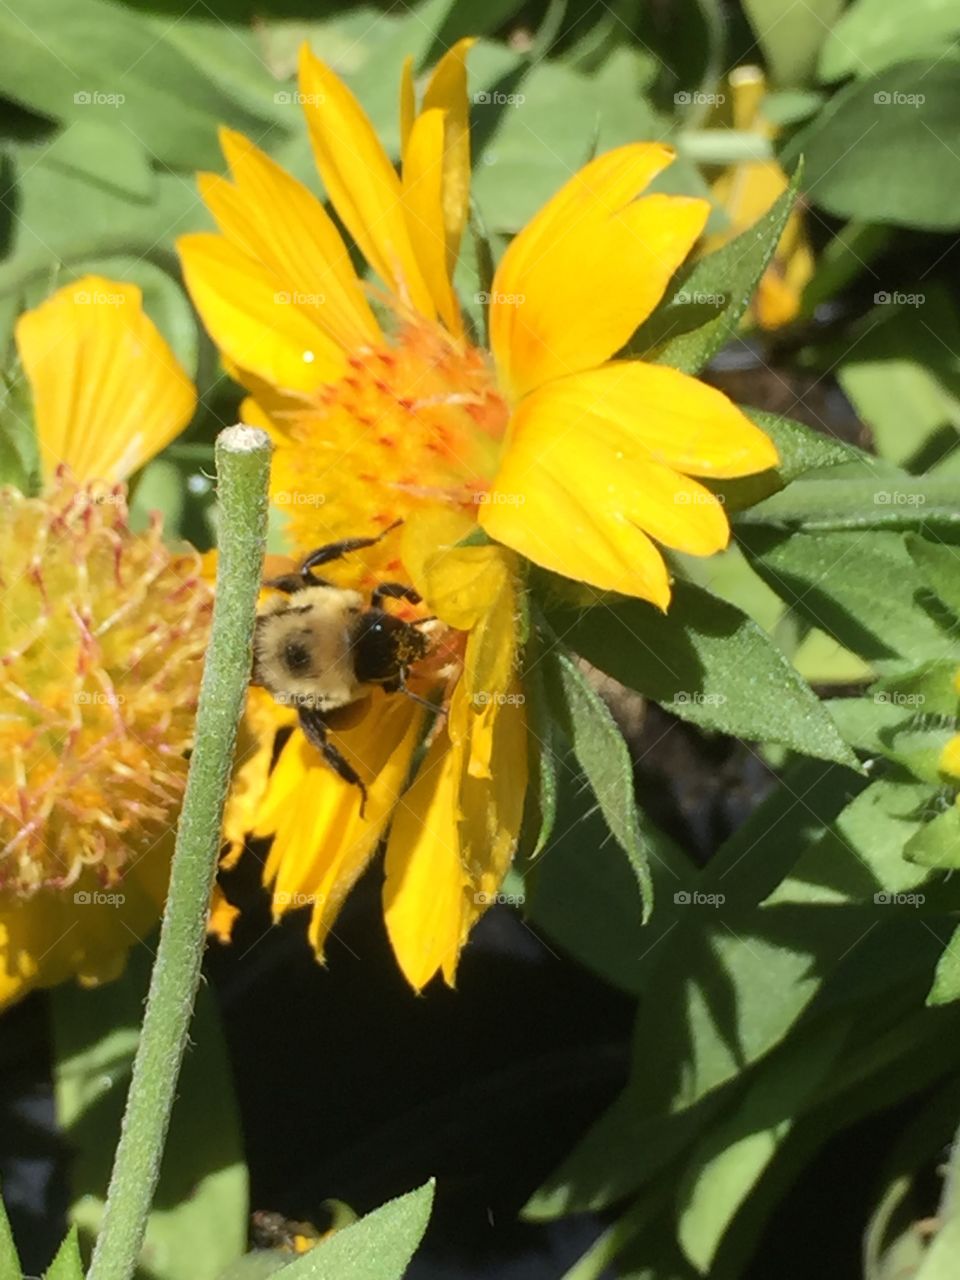 Be pollination on a bright summer day 